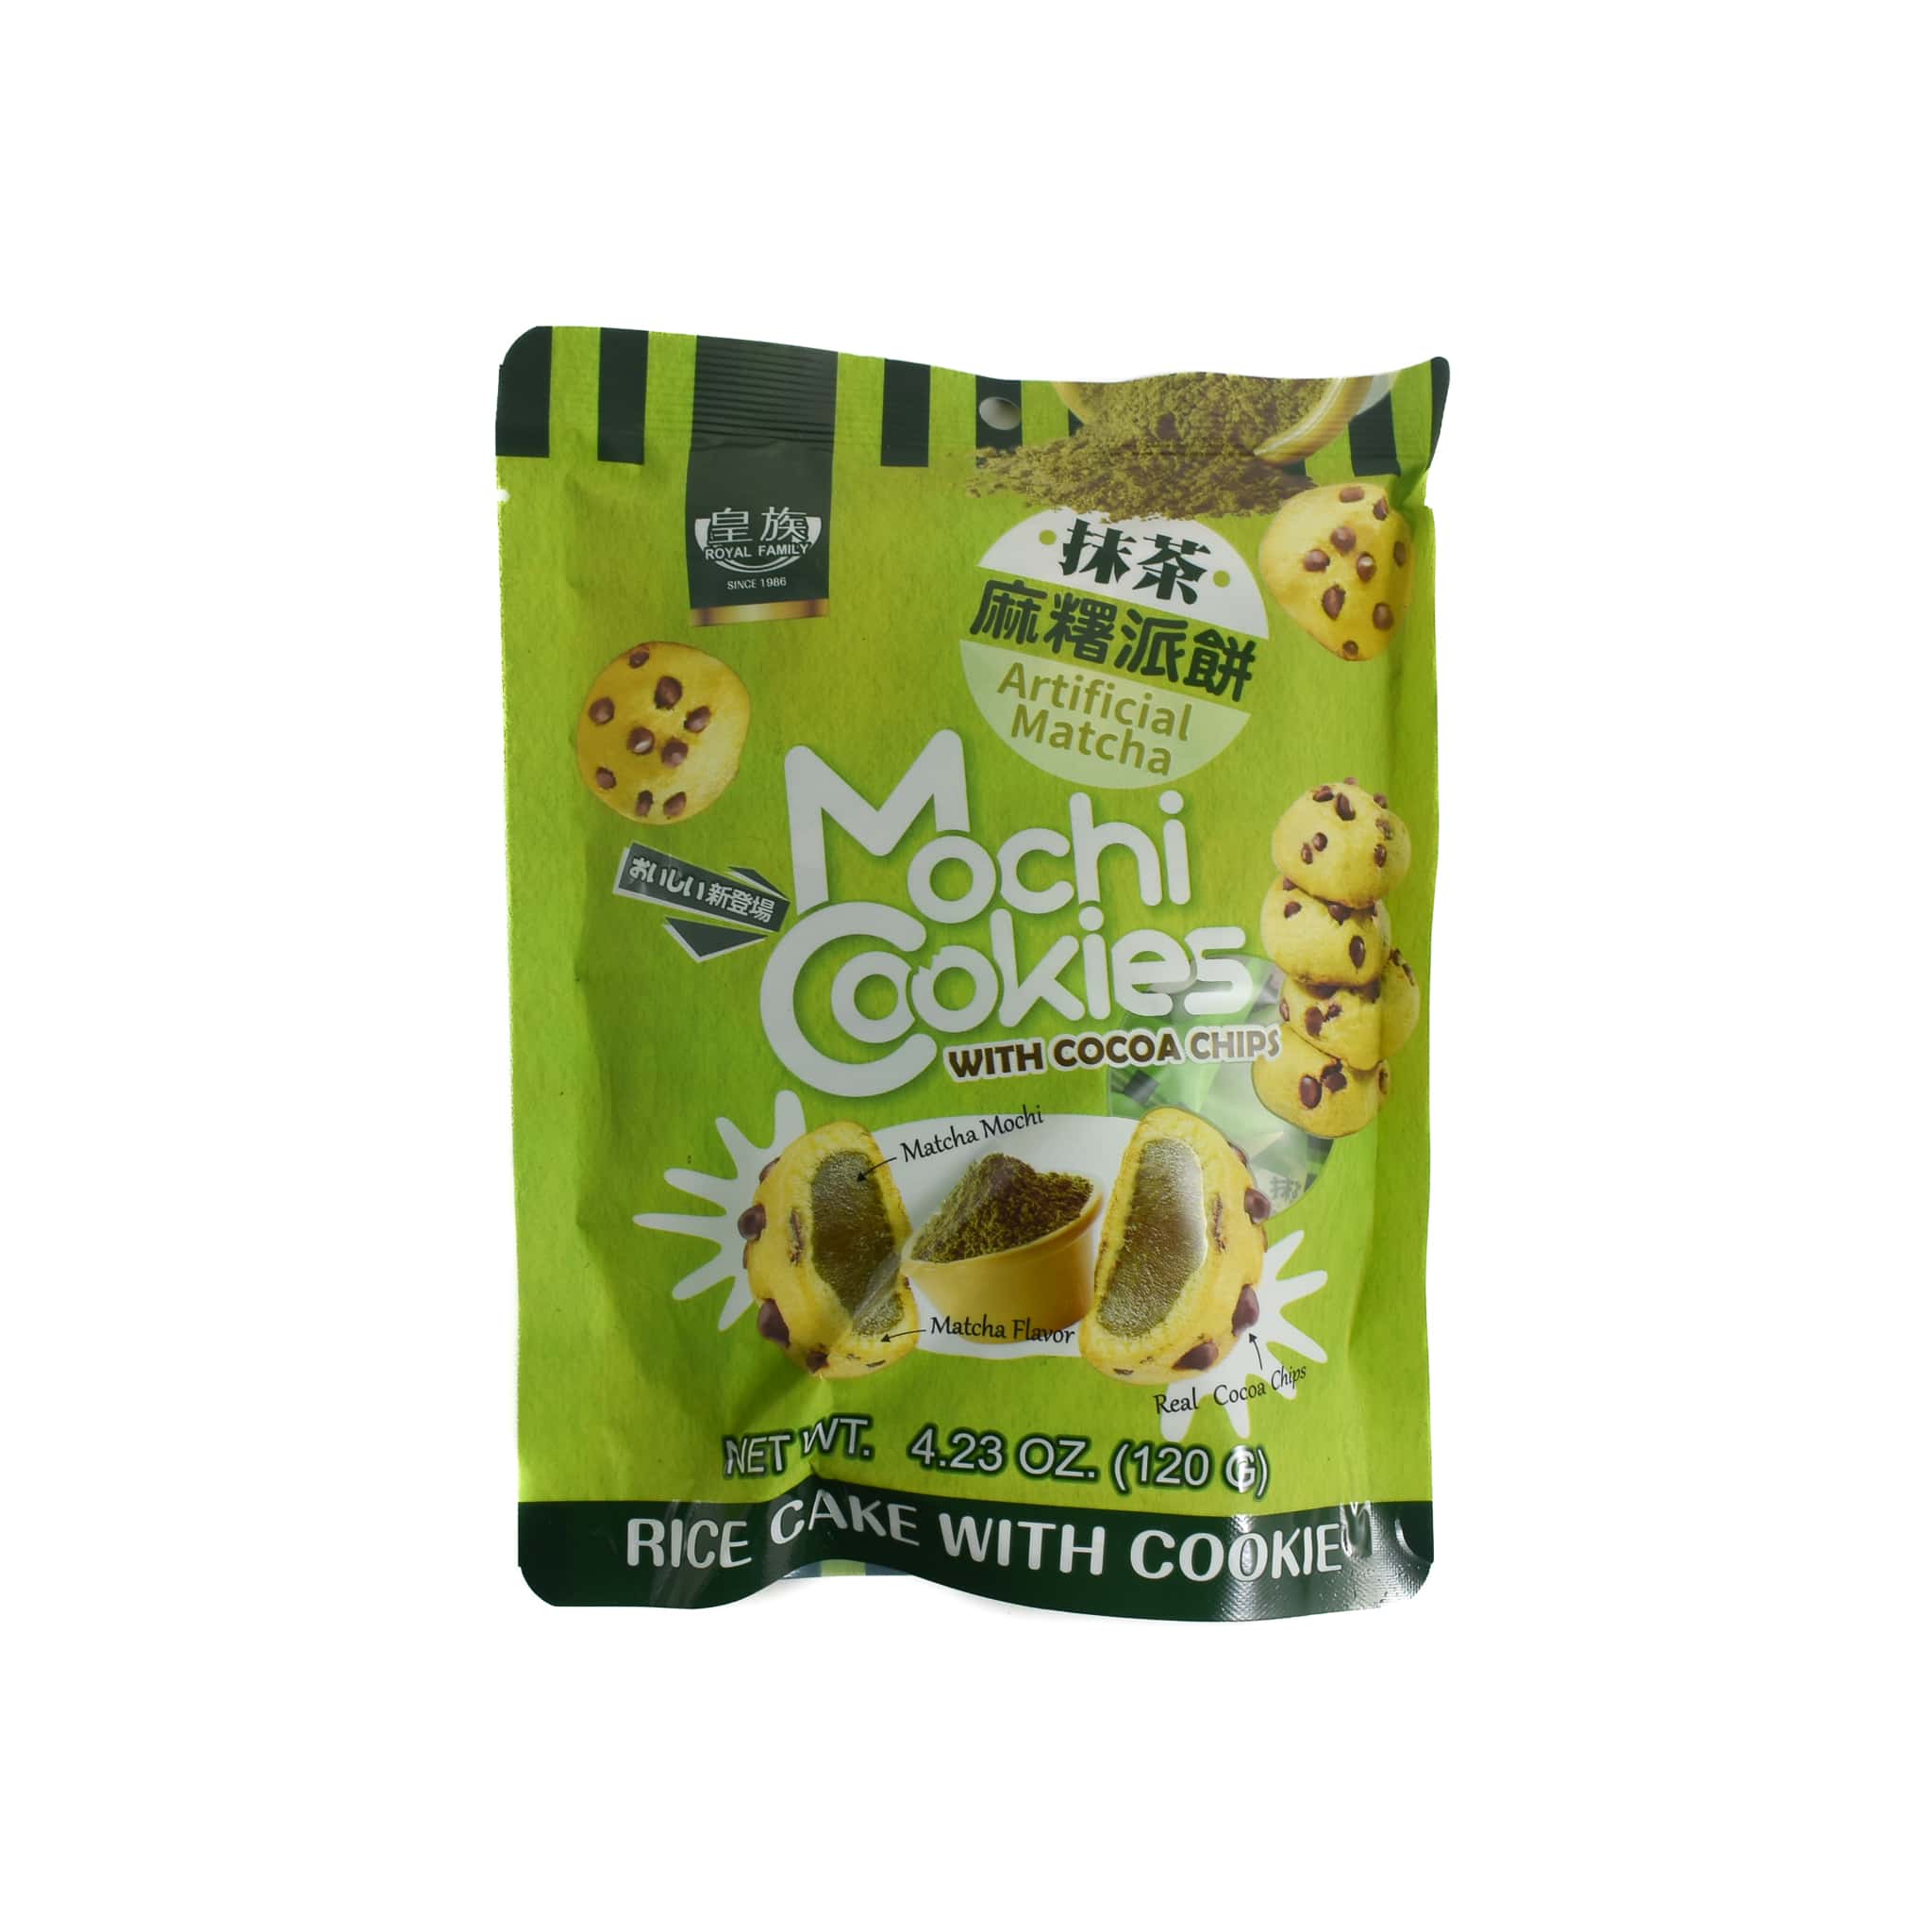 Royal Family Pie Cookies with Matcha Mochi, 120g